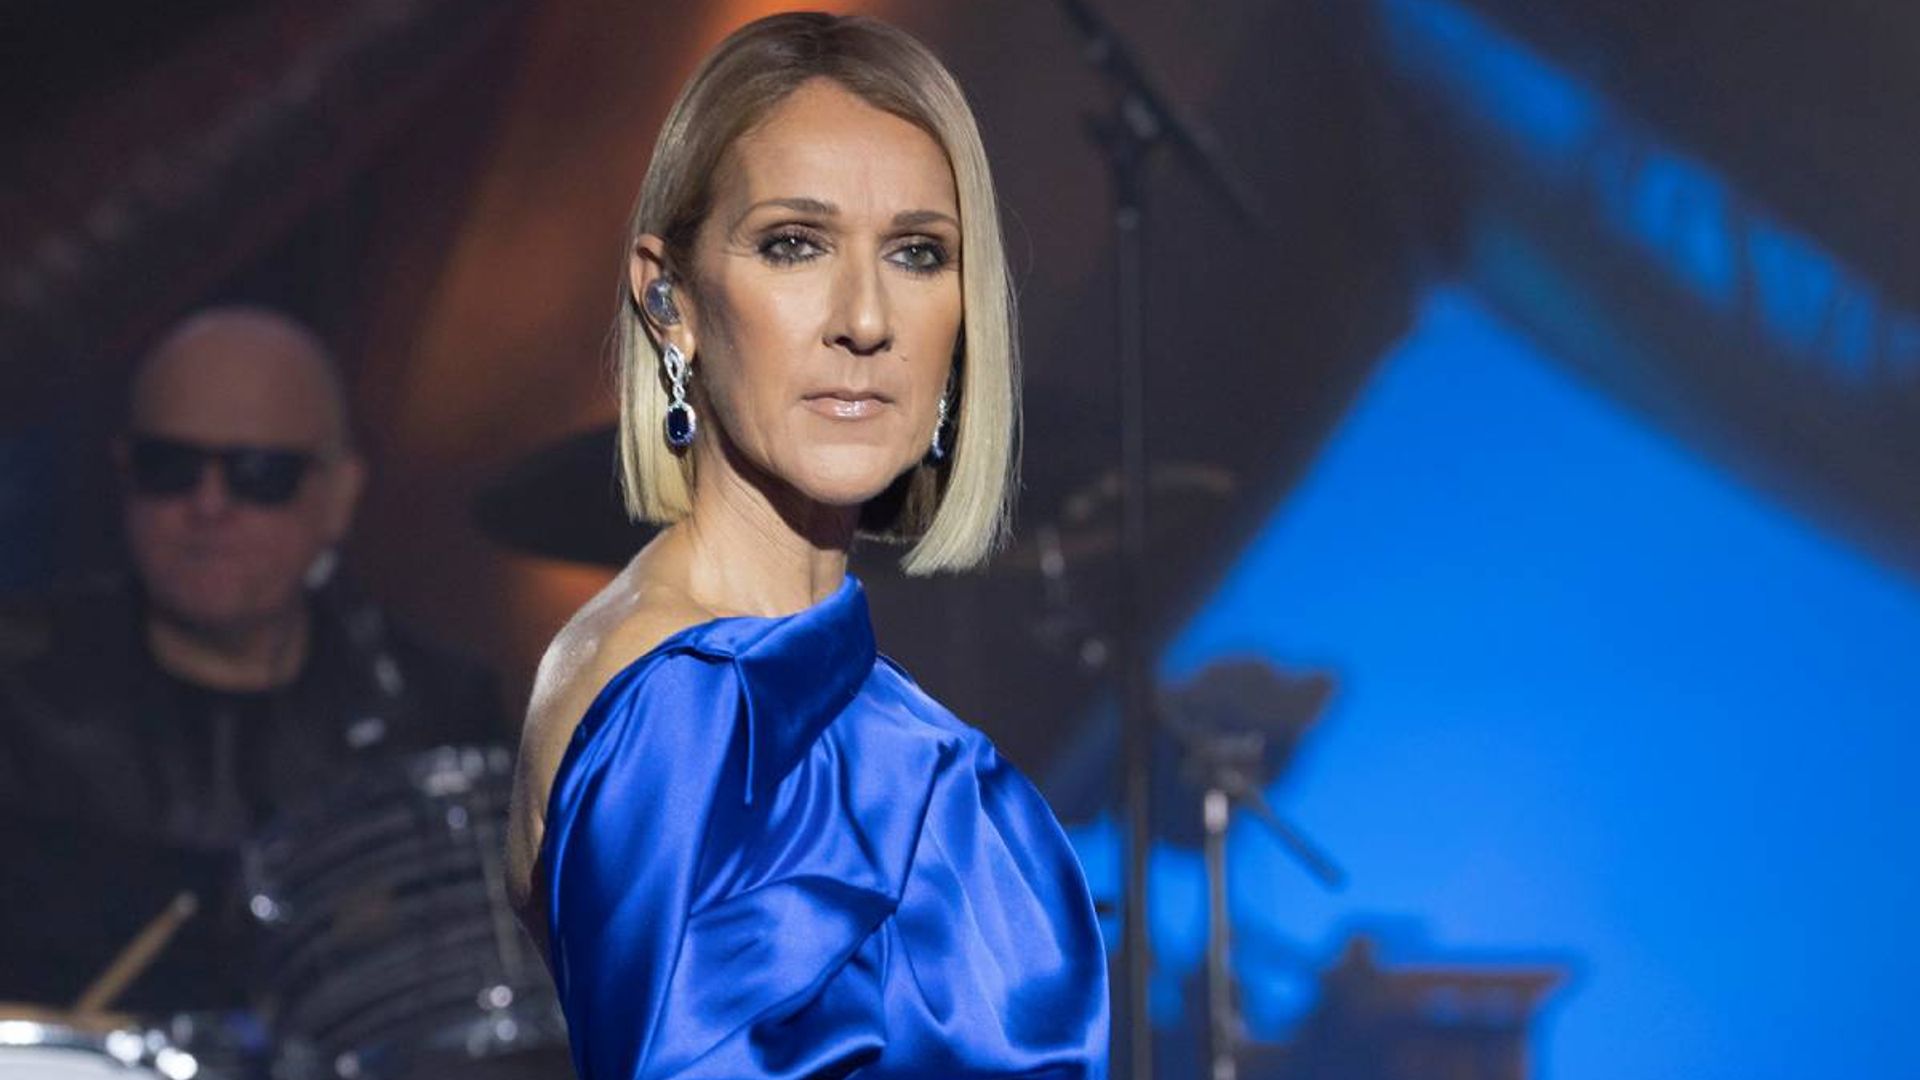 Celine Dion surprises fans with exciting career news involving unexpected stars